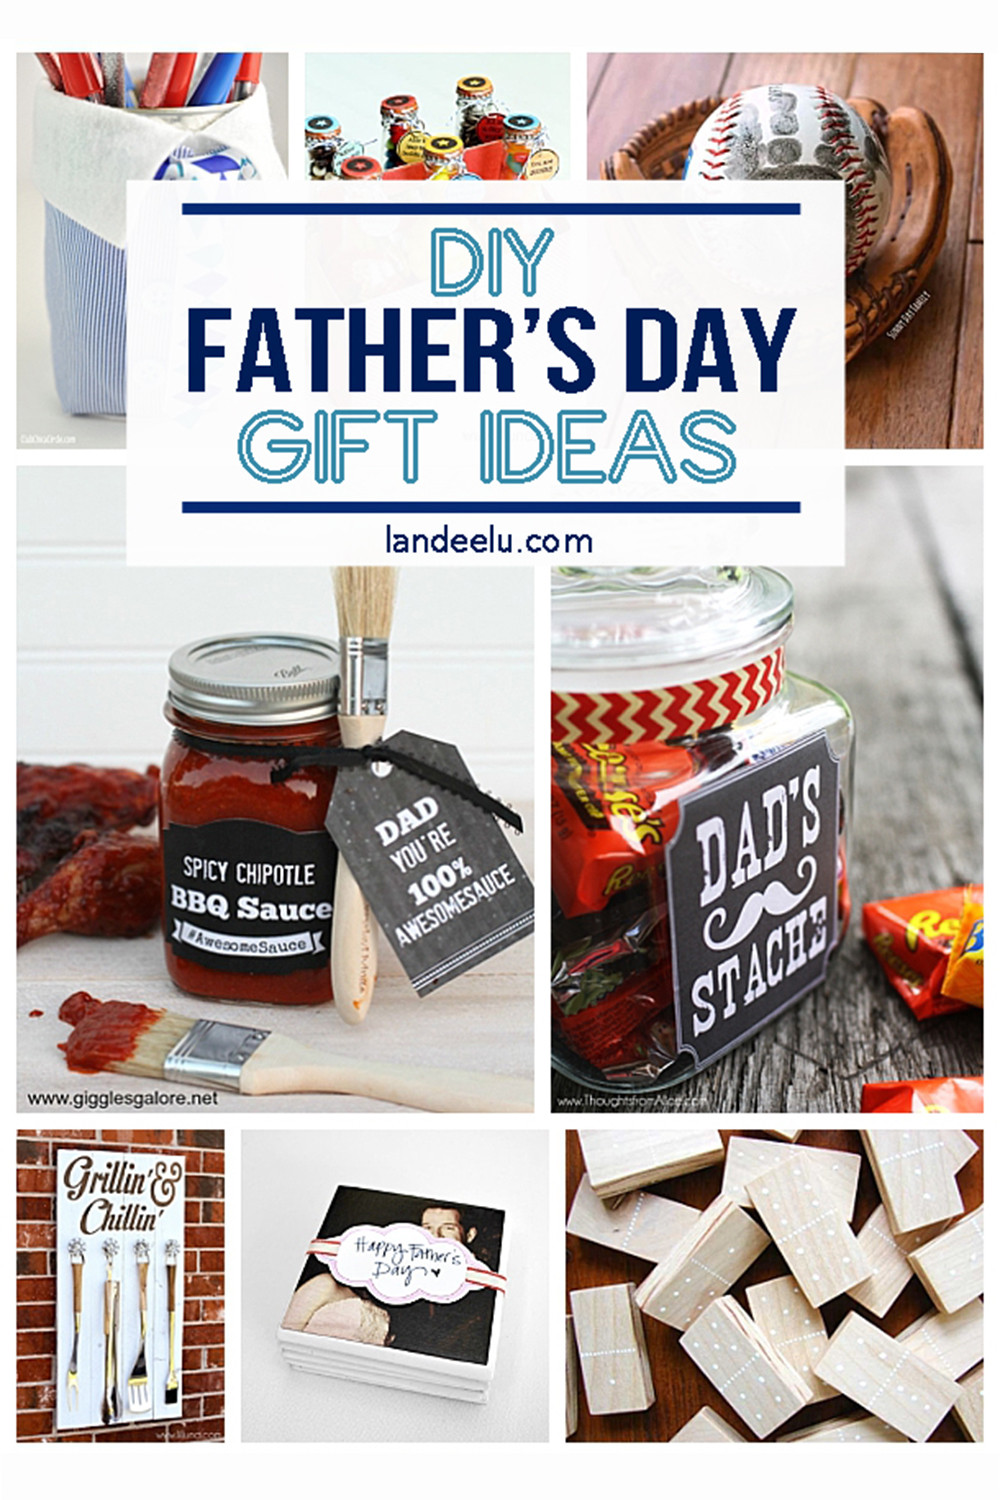 Fathers Day DIY Gifts
 21 DIY Father s Day Gifts to Celebrate Dad landeelu